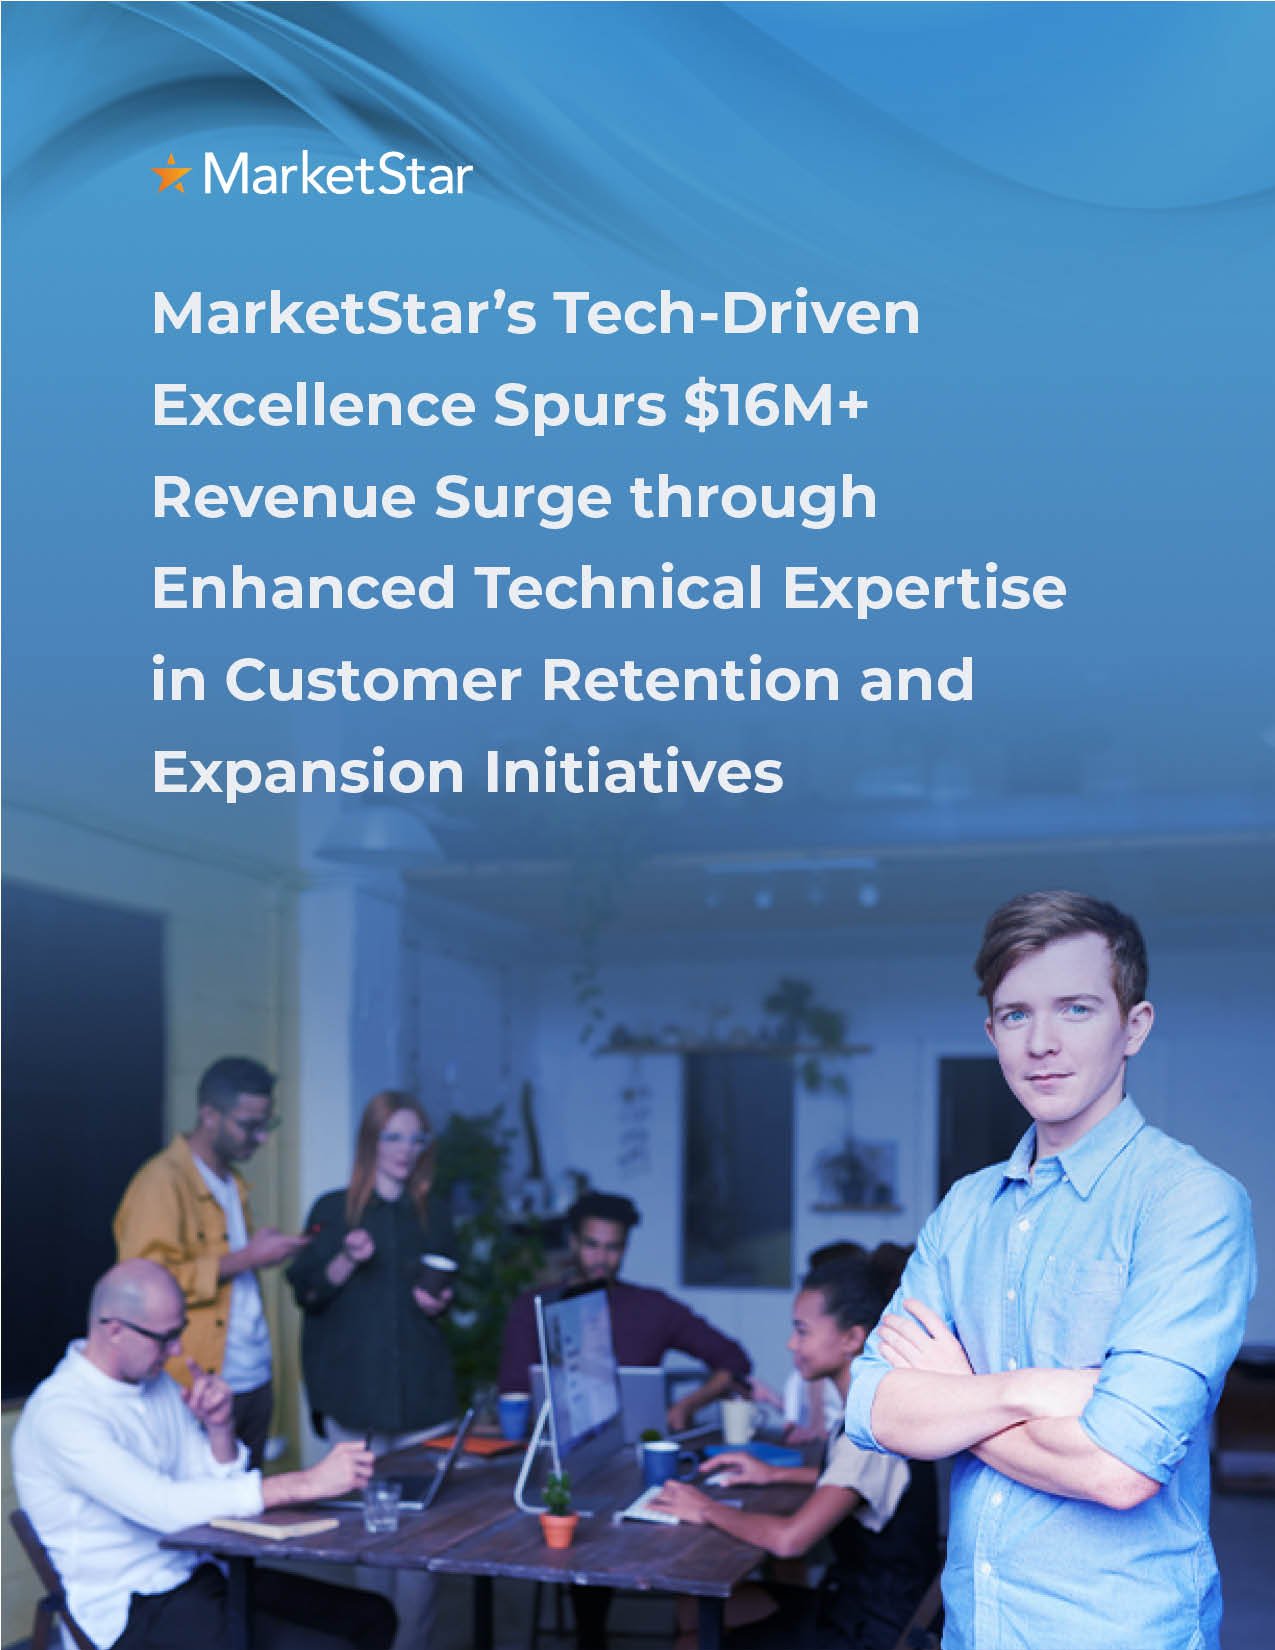 MarketStar’s Tech-Driven Excellence Spurs $16M+ Revenue Surge throughEnhanced Technical Expertise in Customer Retention and Expansion Initiatives